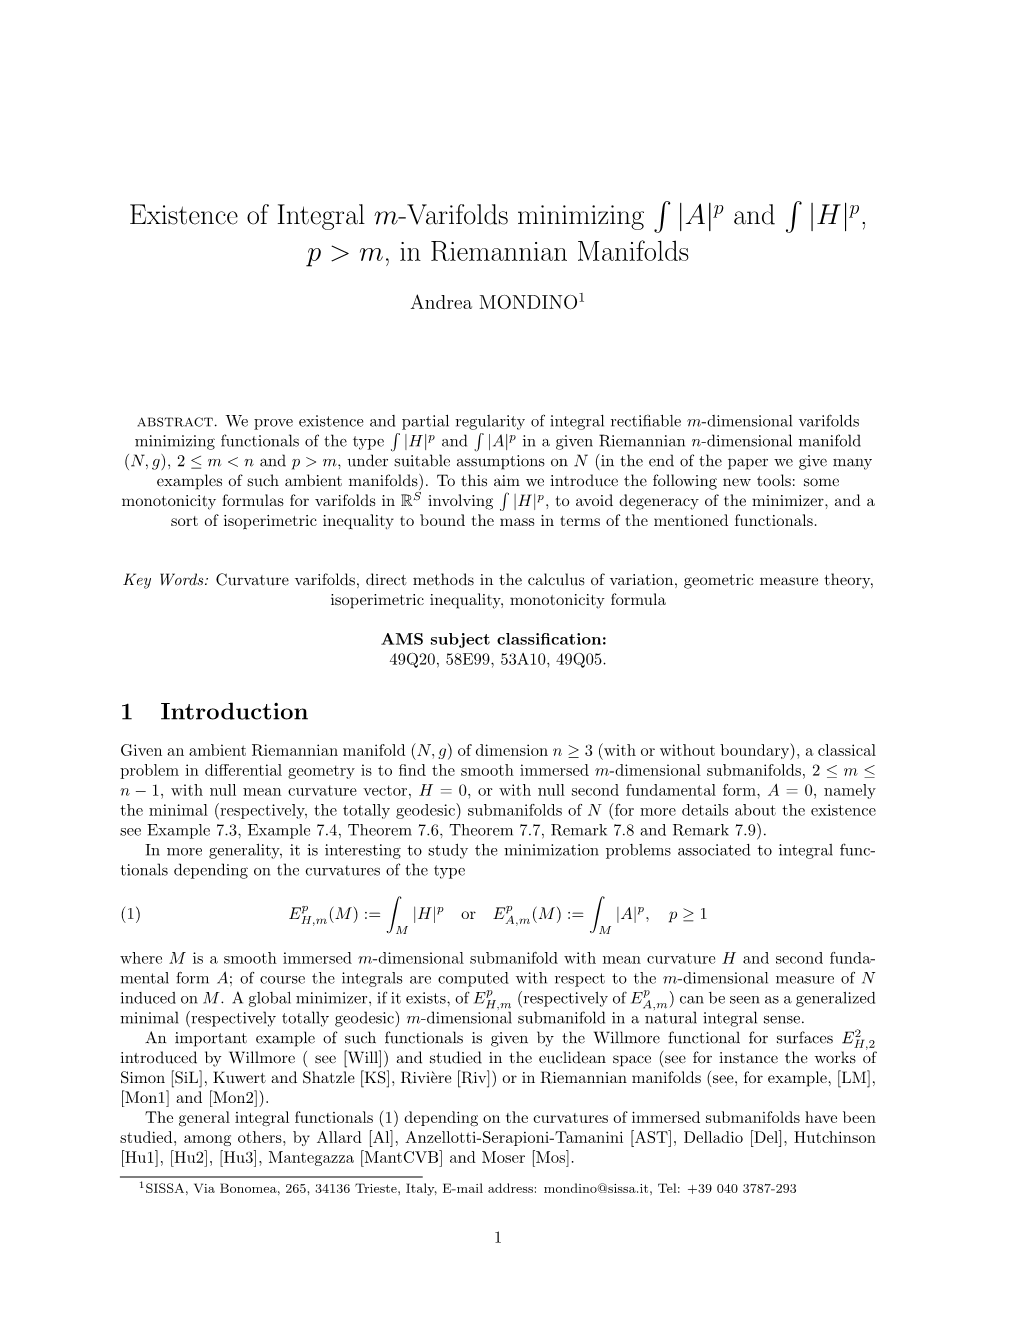 Existence of Integral M-Varifolds Minimizing ∫ |A| P And∫ |H| P&gt;M, in Riemannian Manifolds